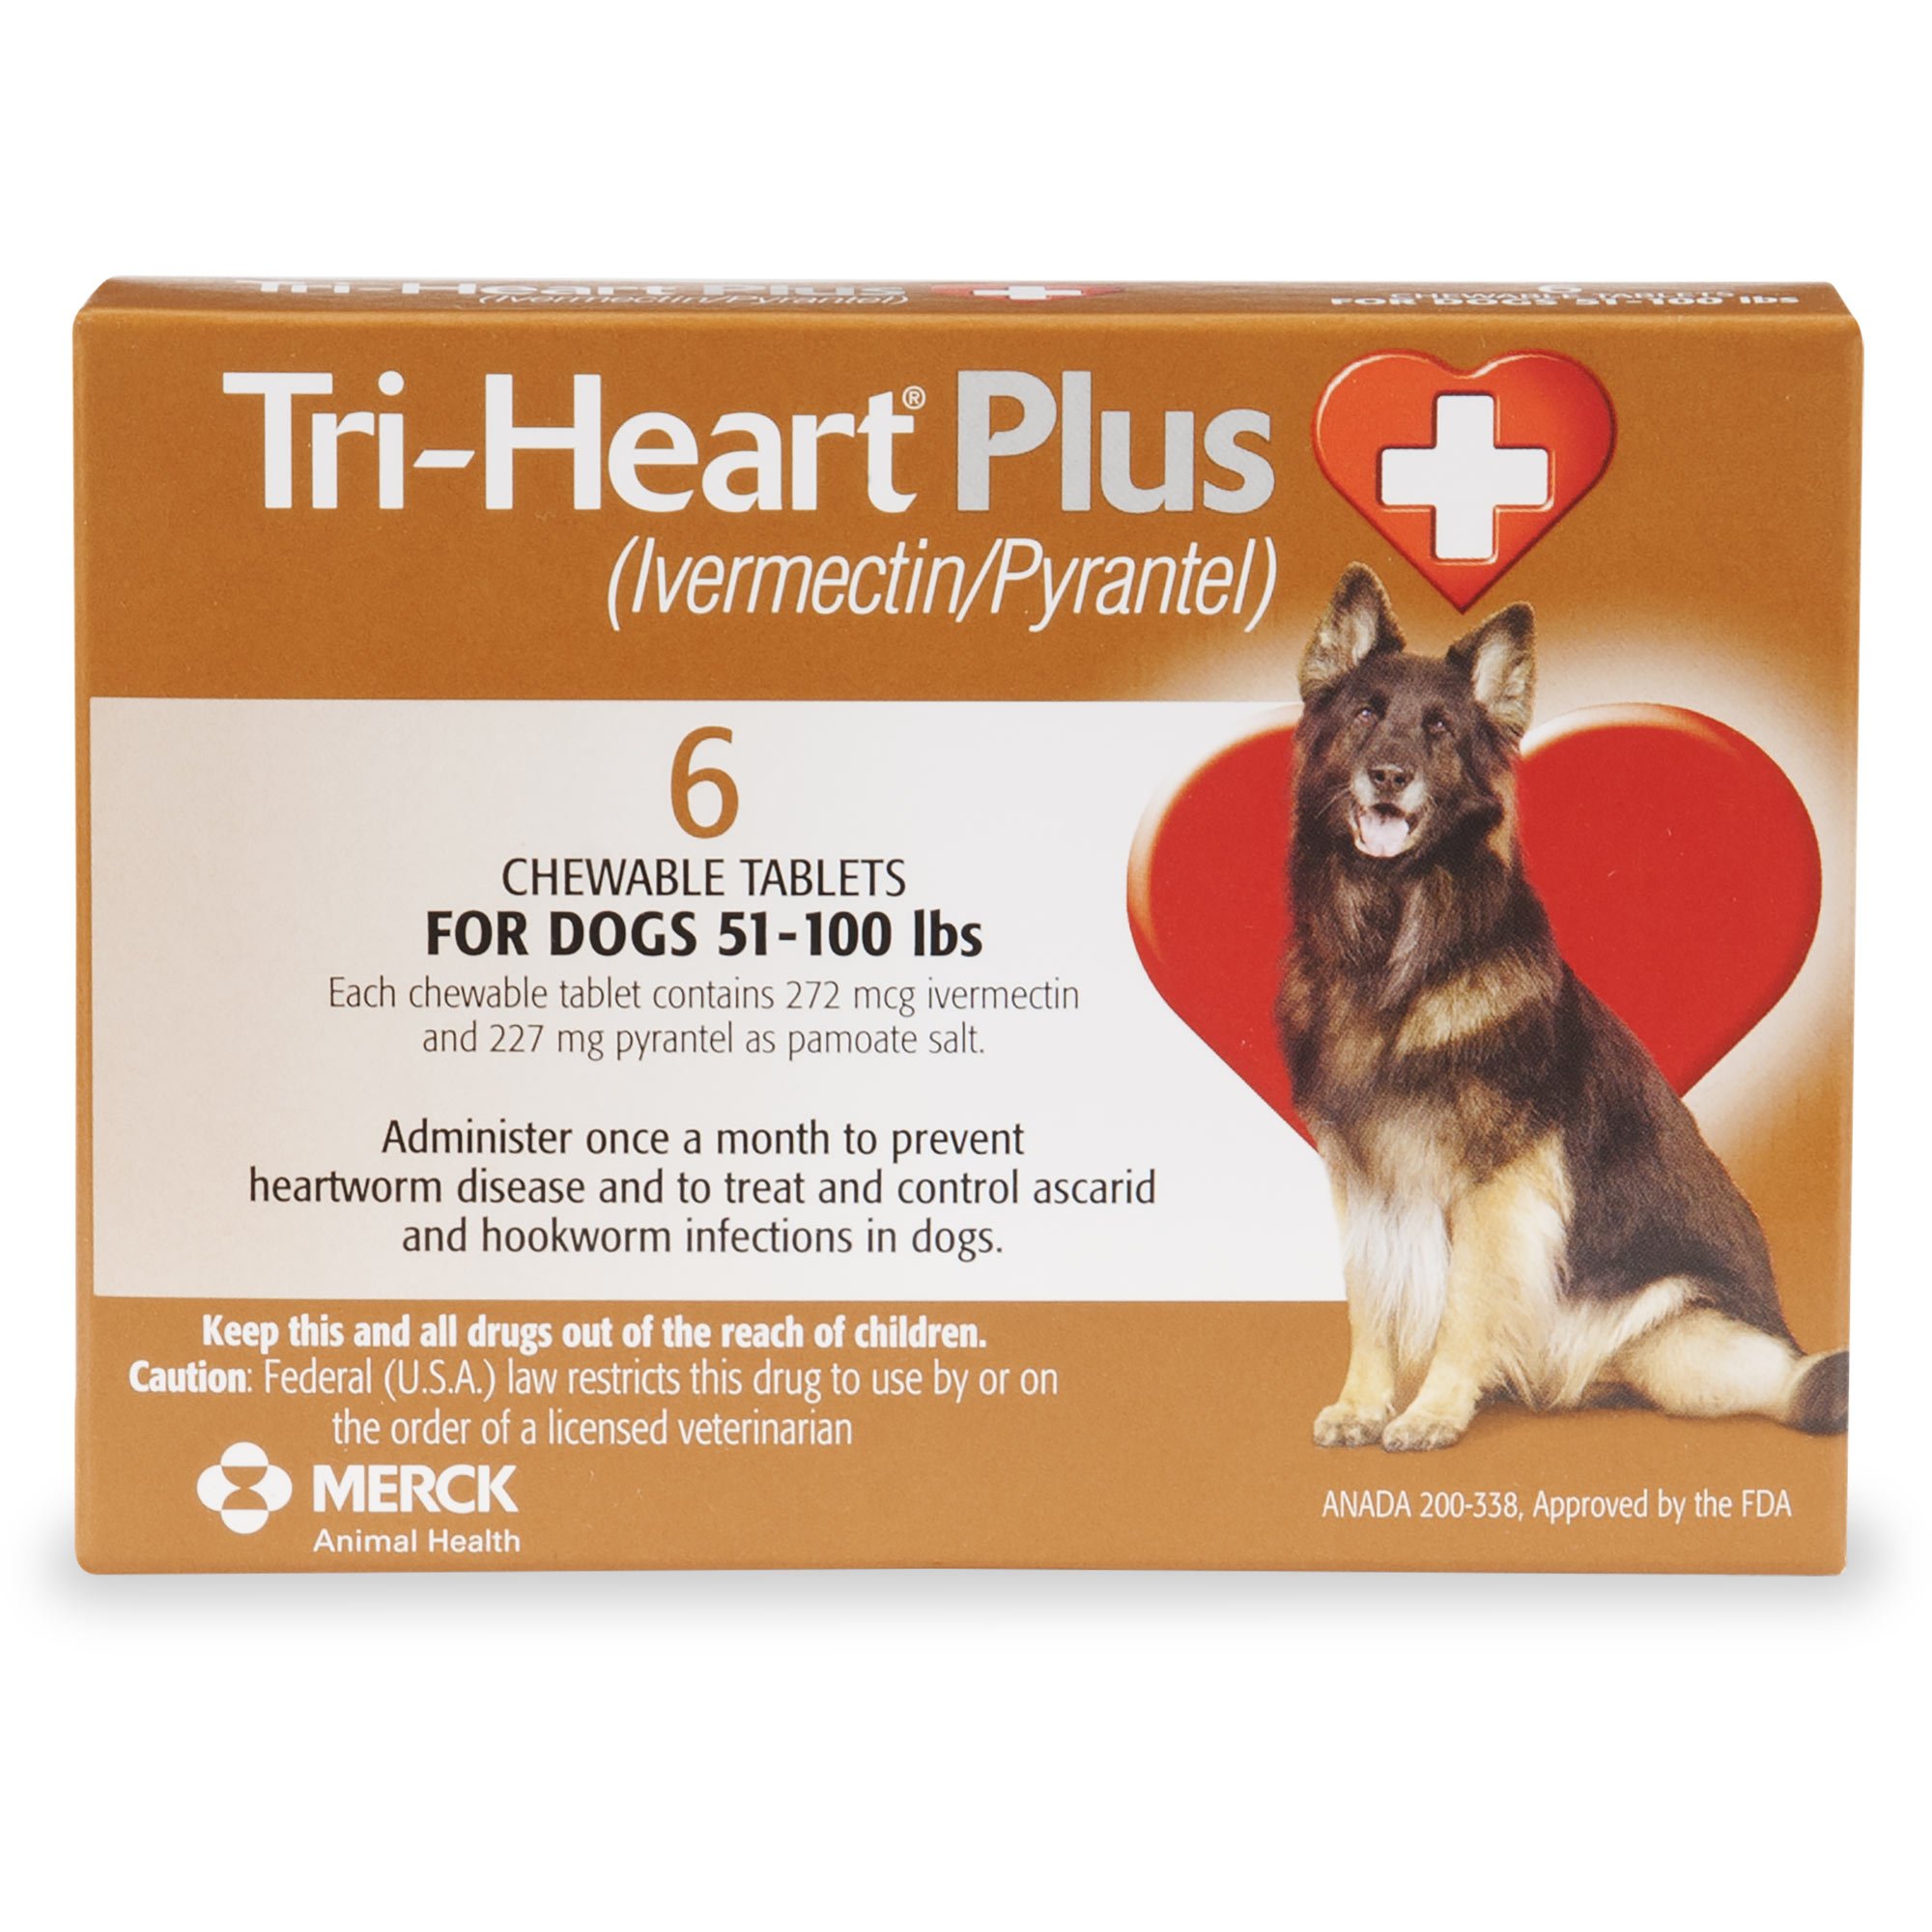 Tri-Heart Plus Chewable Tablets for Dogs 51 to 100 lbs.